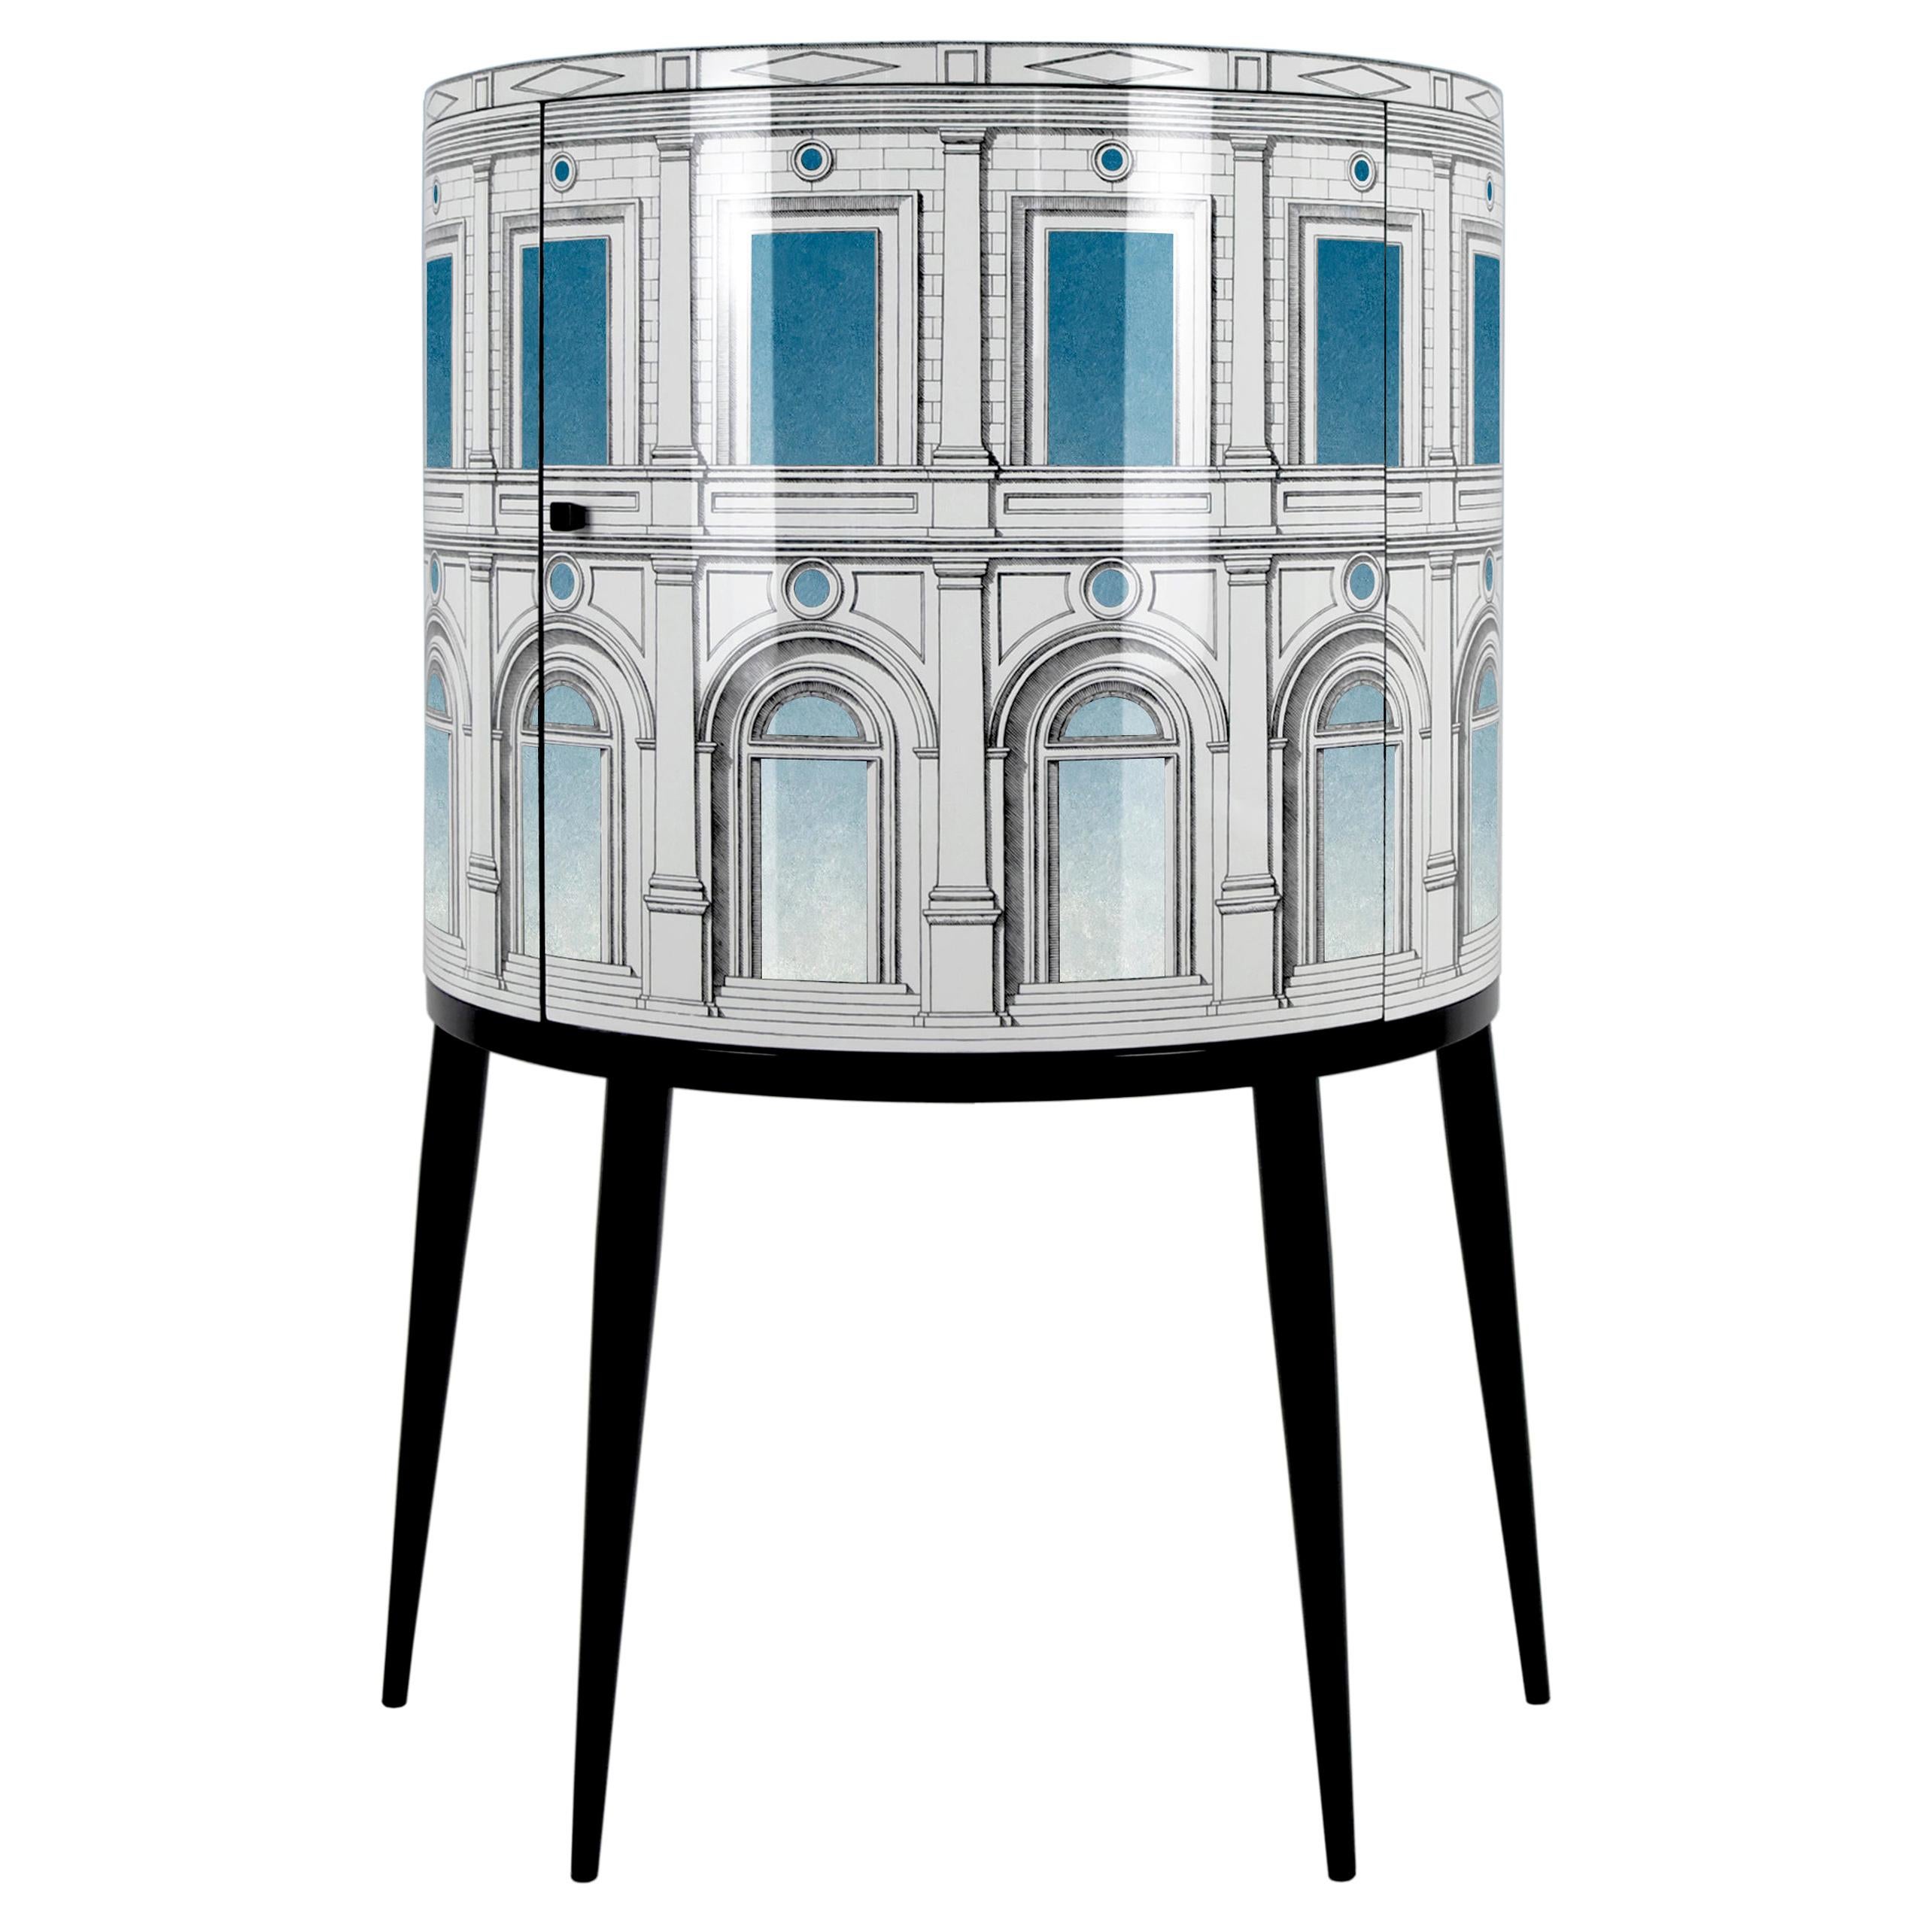 Fornasetti Consolle Architettura Celeste Architectural Motif Handcrafted Wood